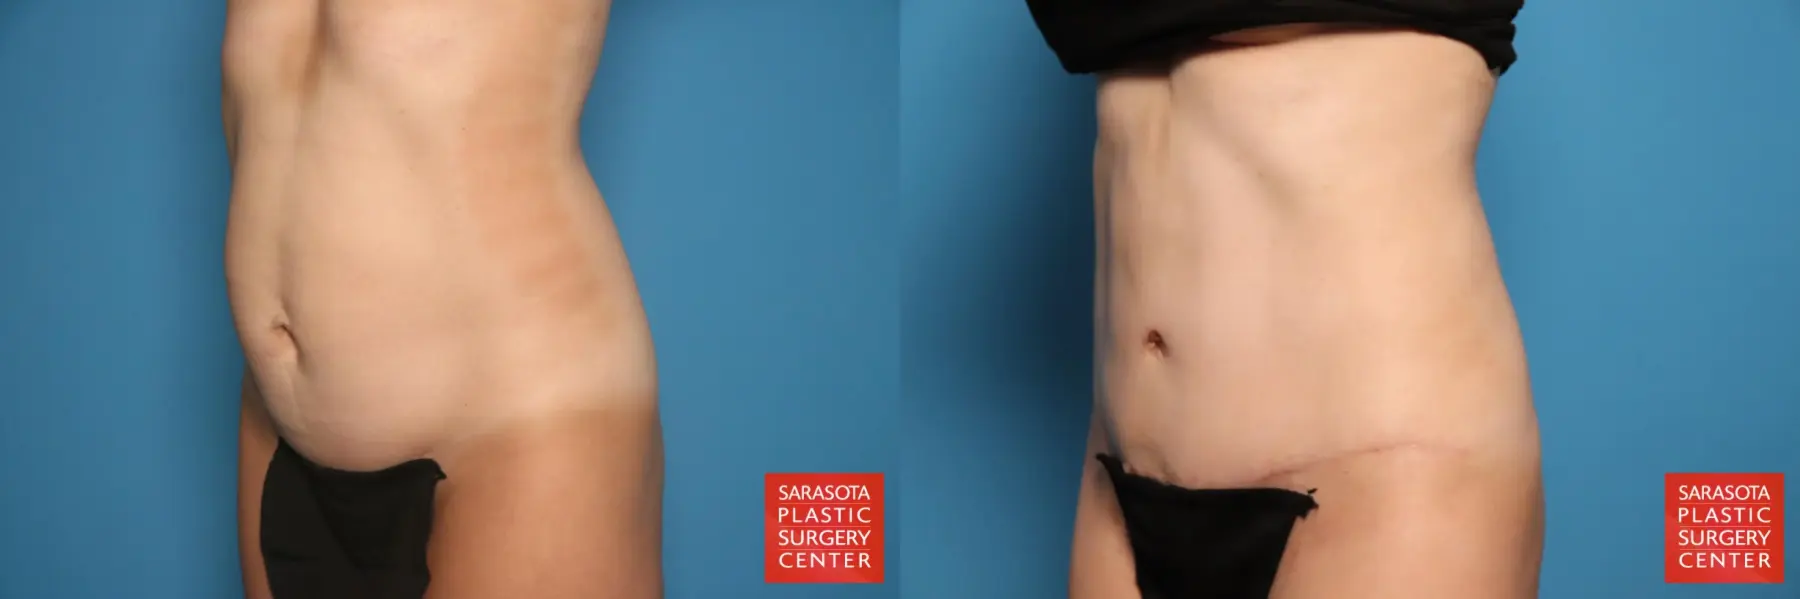 Tummy Tuck: Patient 29 - Before and After 2